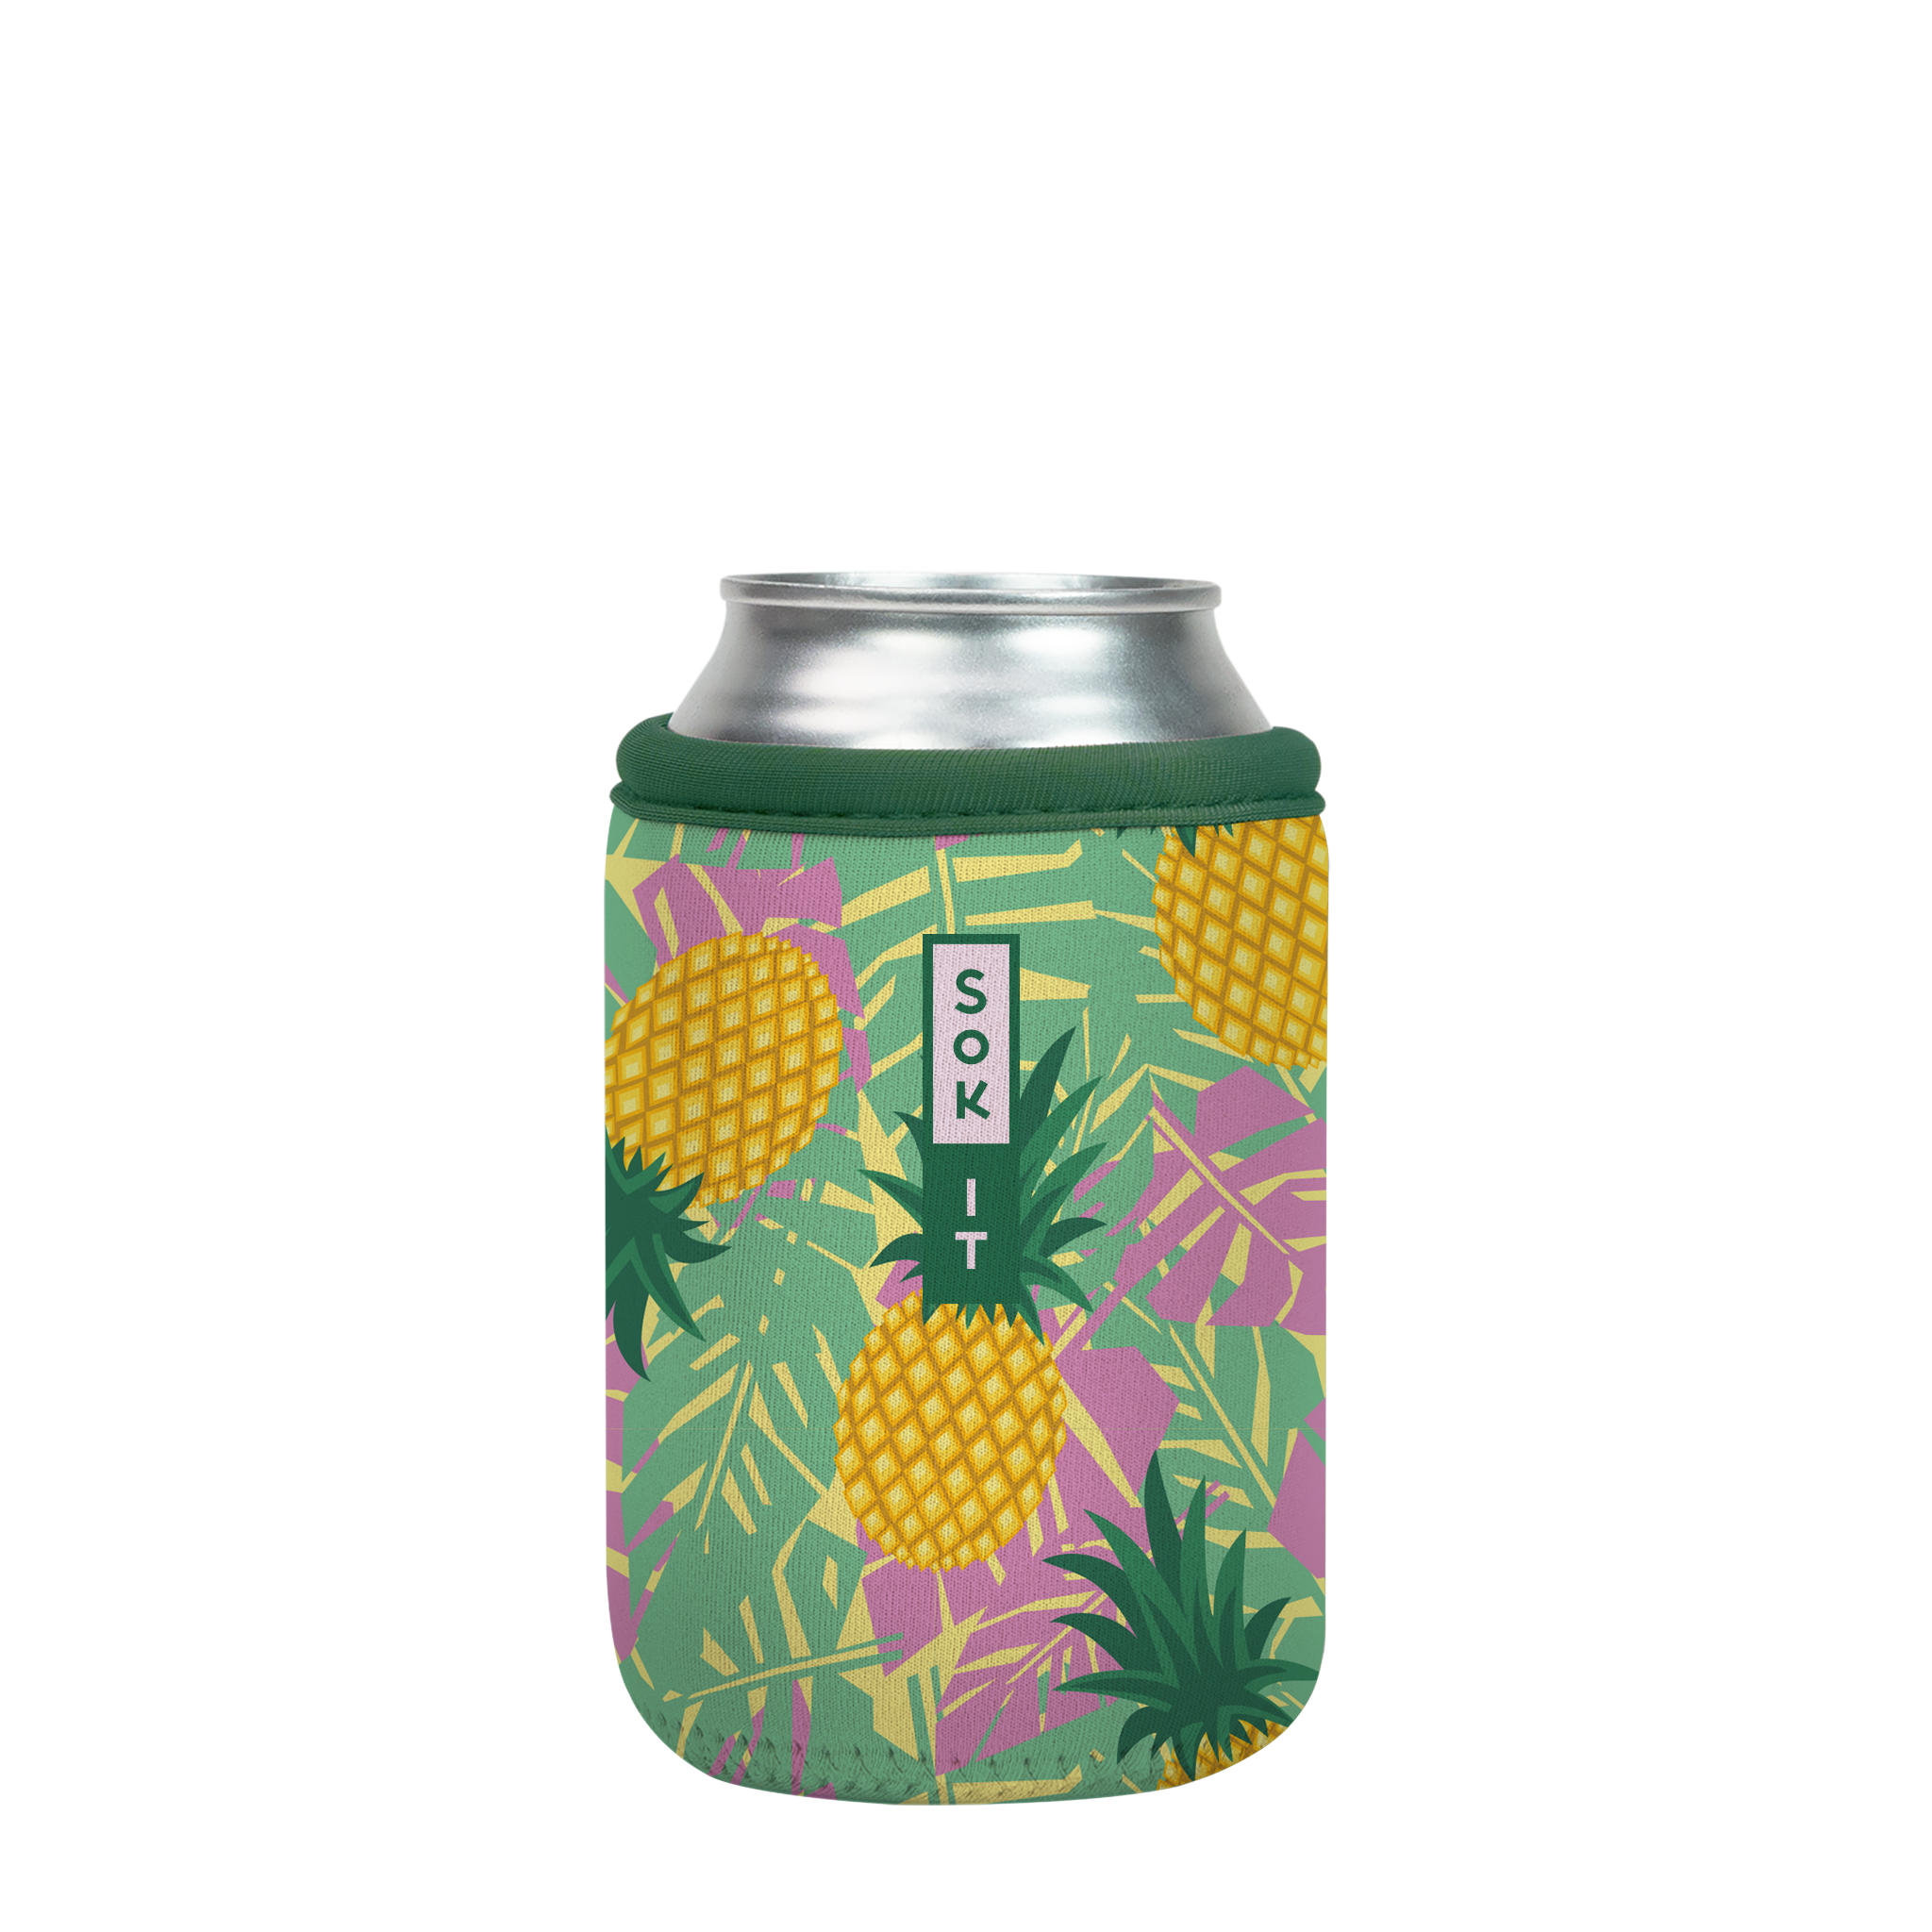 X374_CAS-12_PineappleParadise_Product_120423copy.png